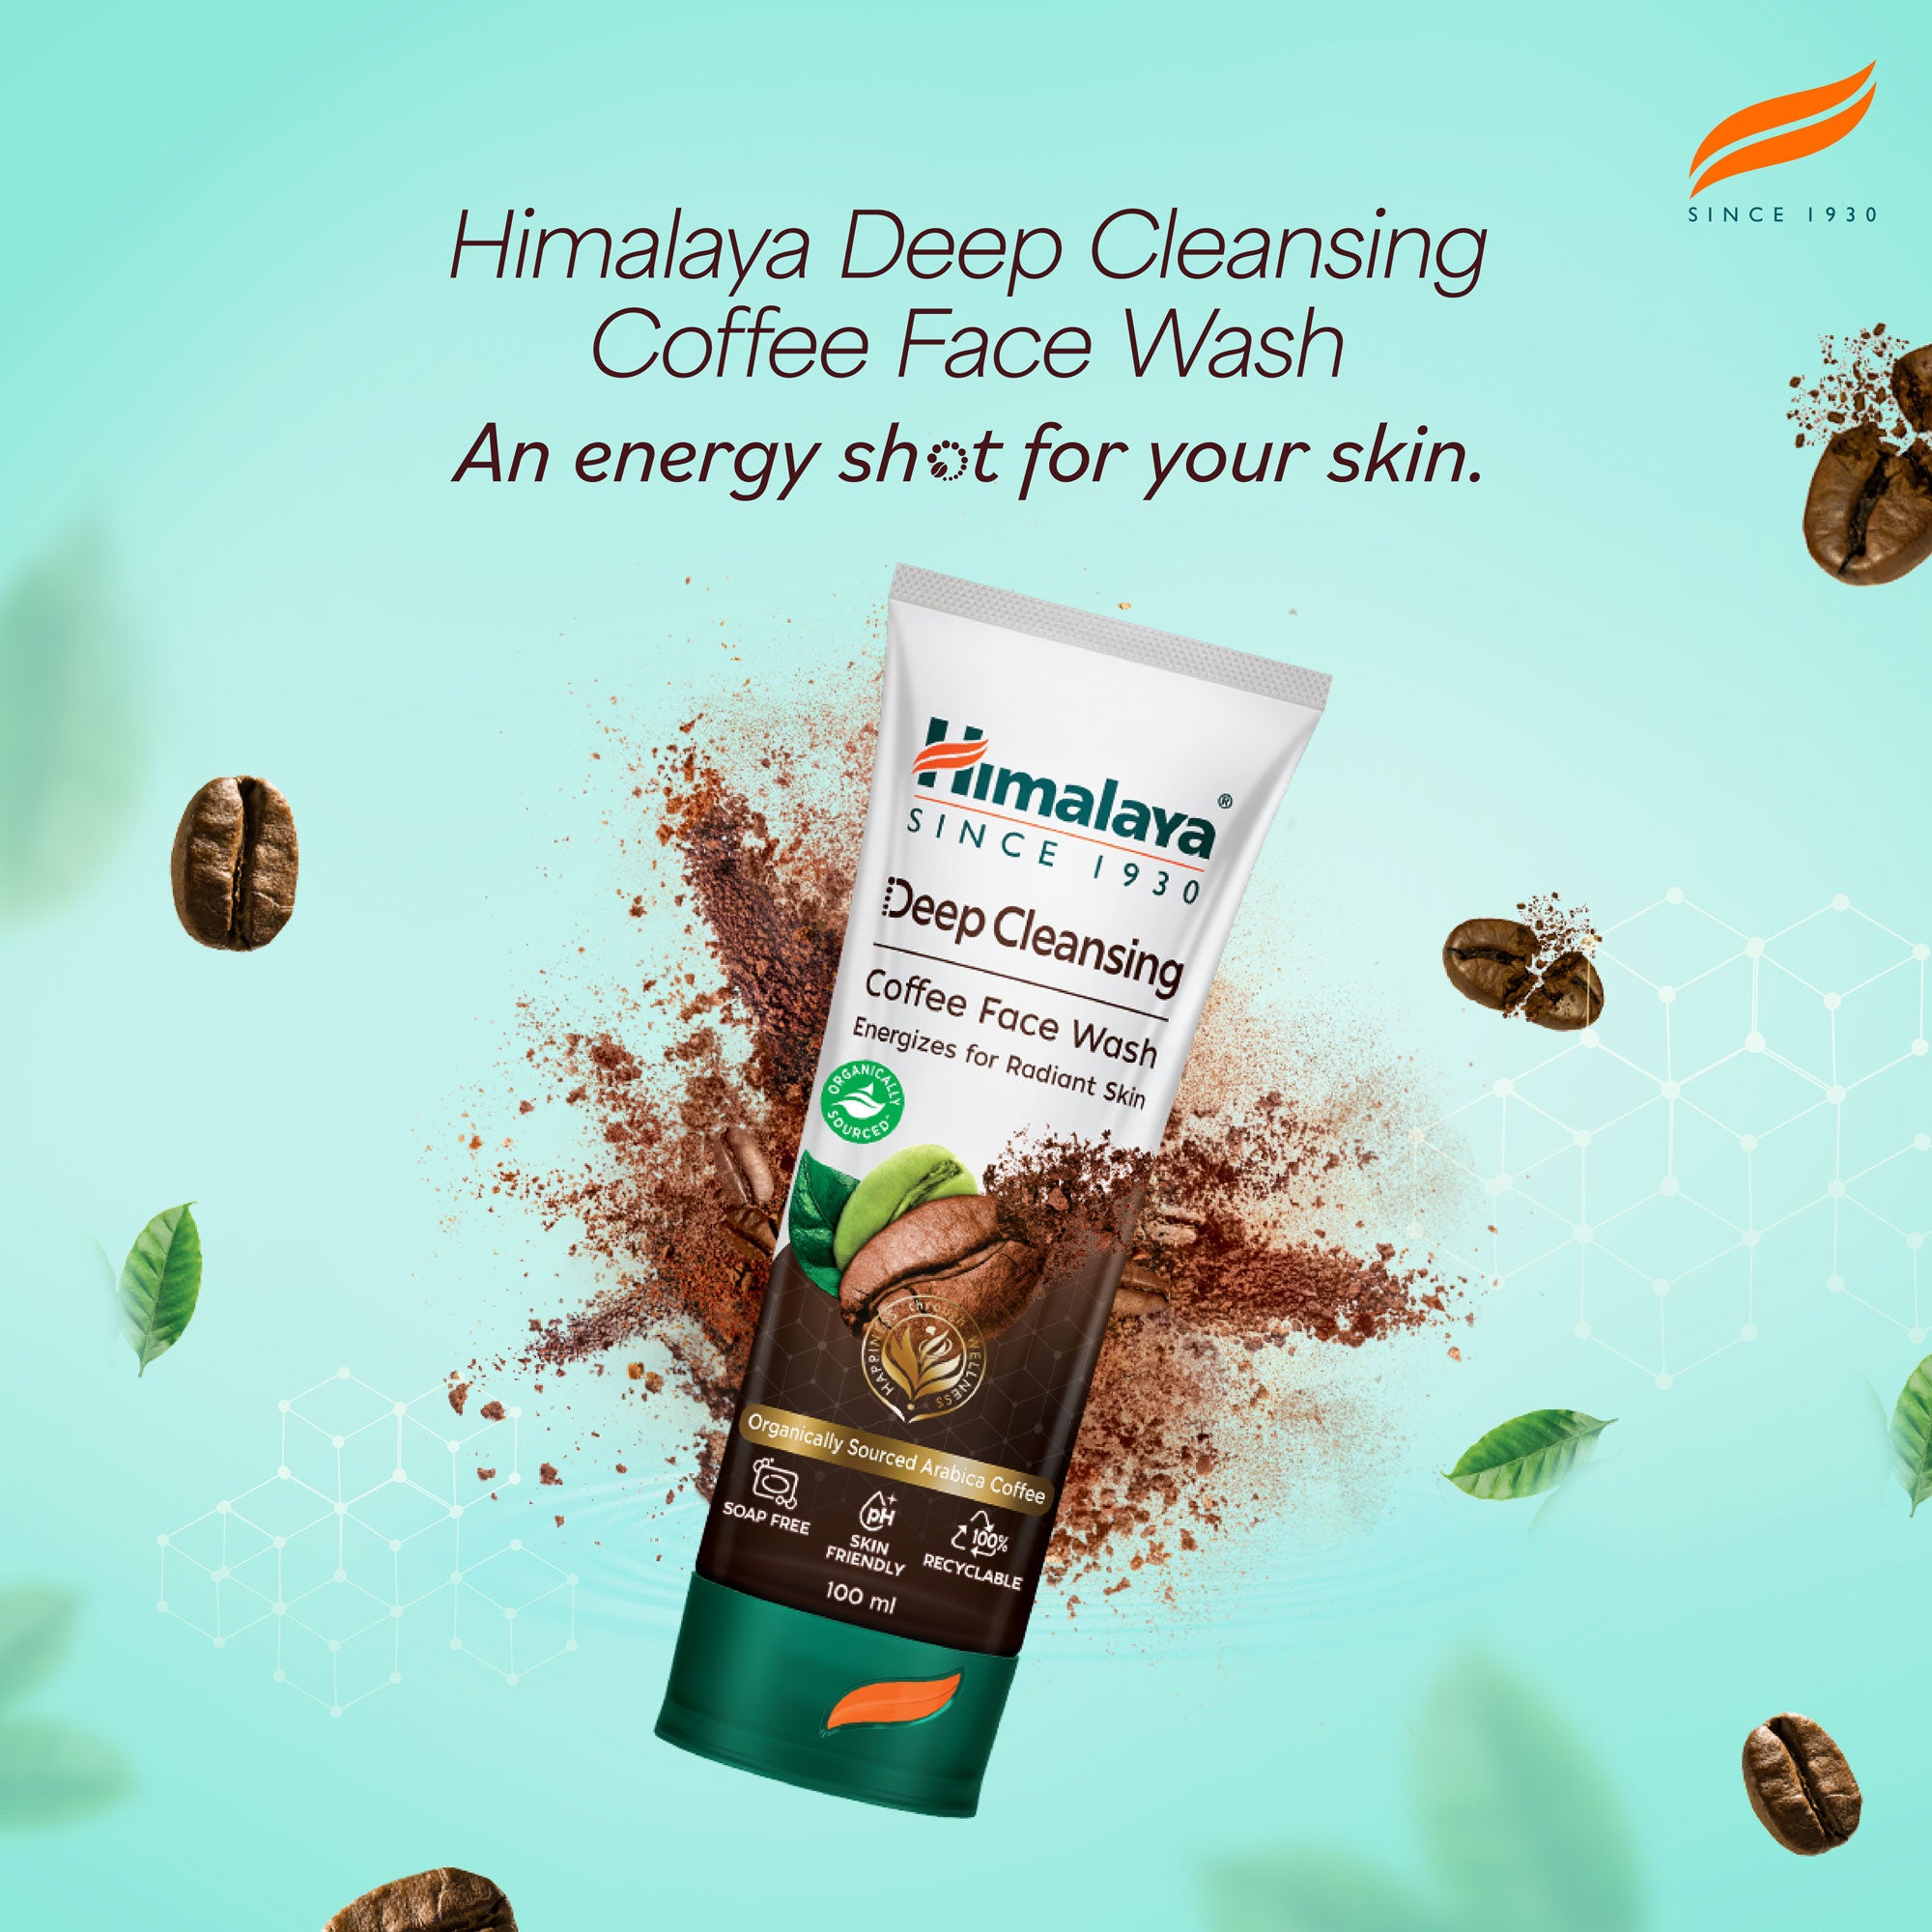 Himalaya Deep Cleansing Coffee Face Wash - An energy shot for your skin. 